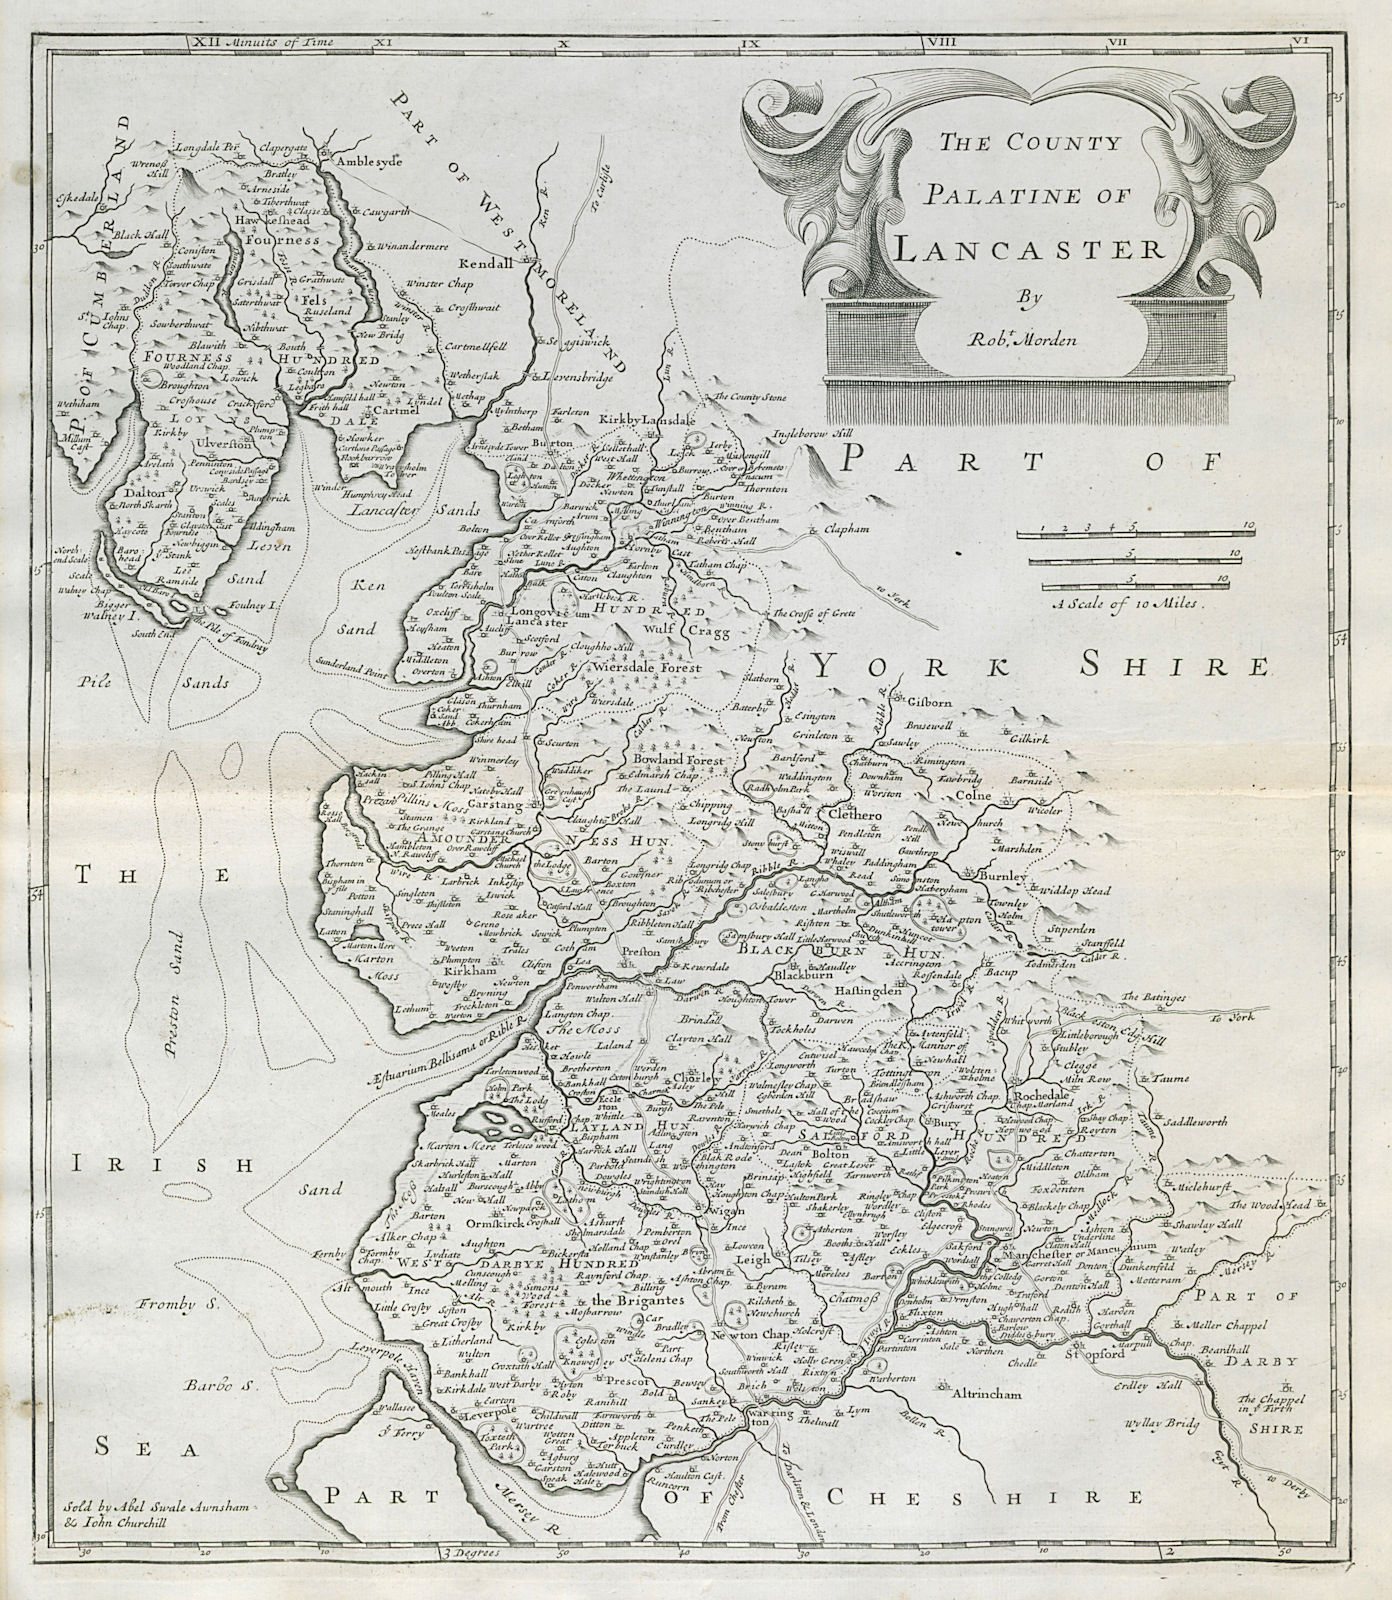 Lancashire. 'THE COUNTY PALATINE OF LANCASTER' by ROBERT MORDEN 1722 old map